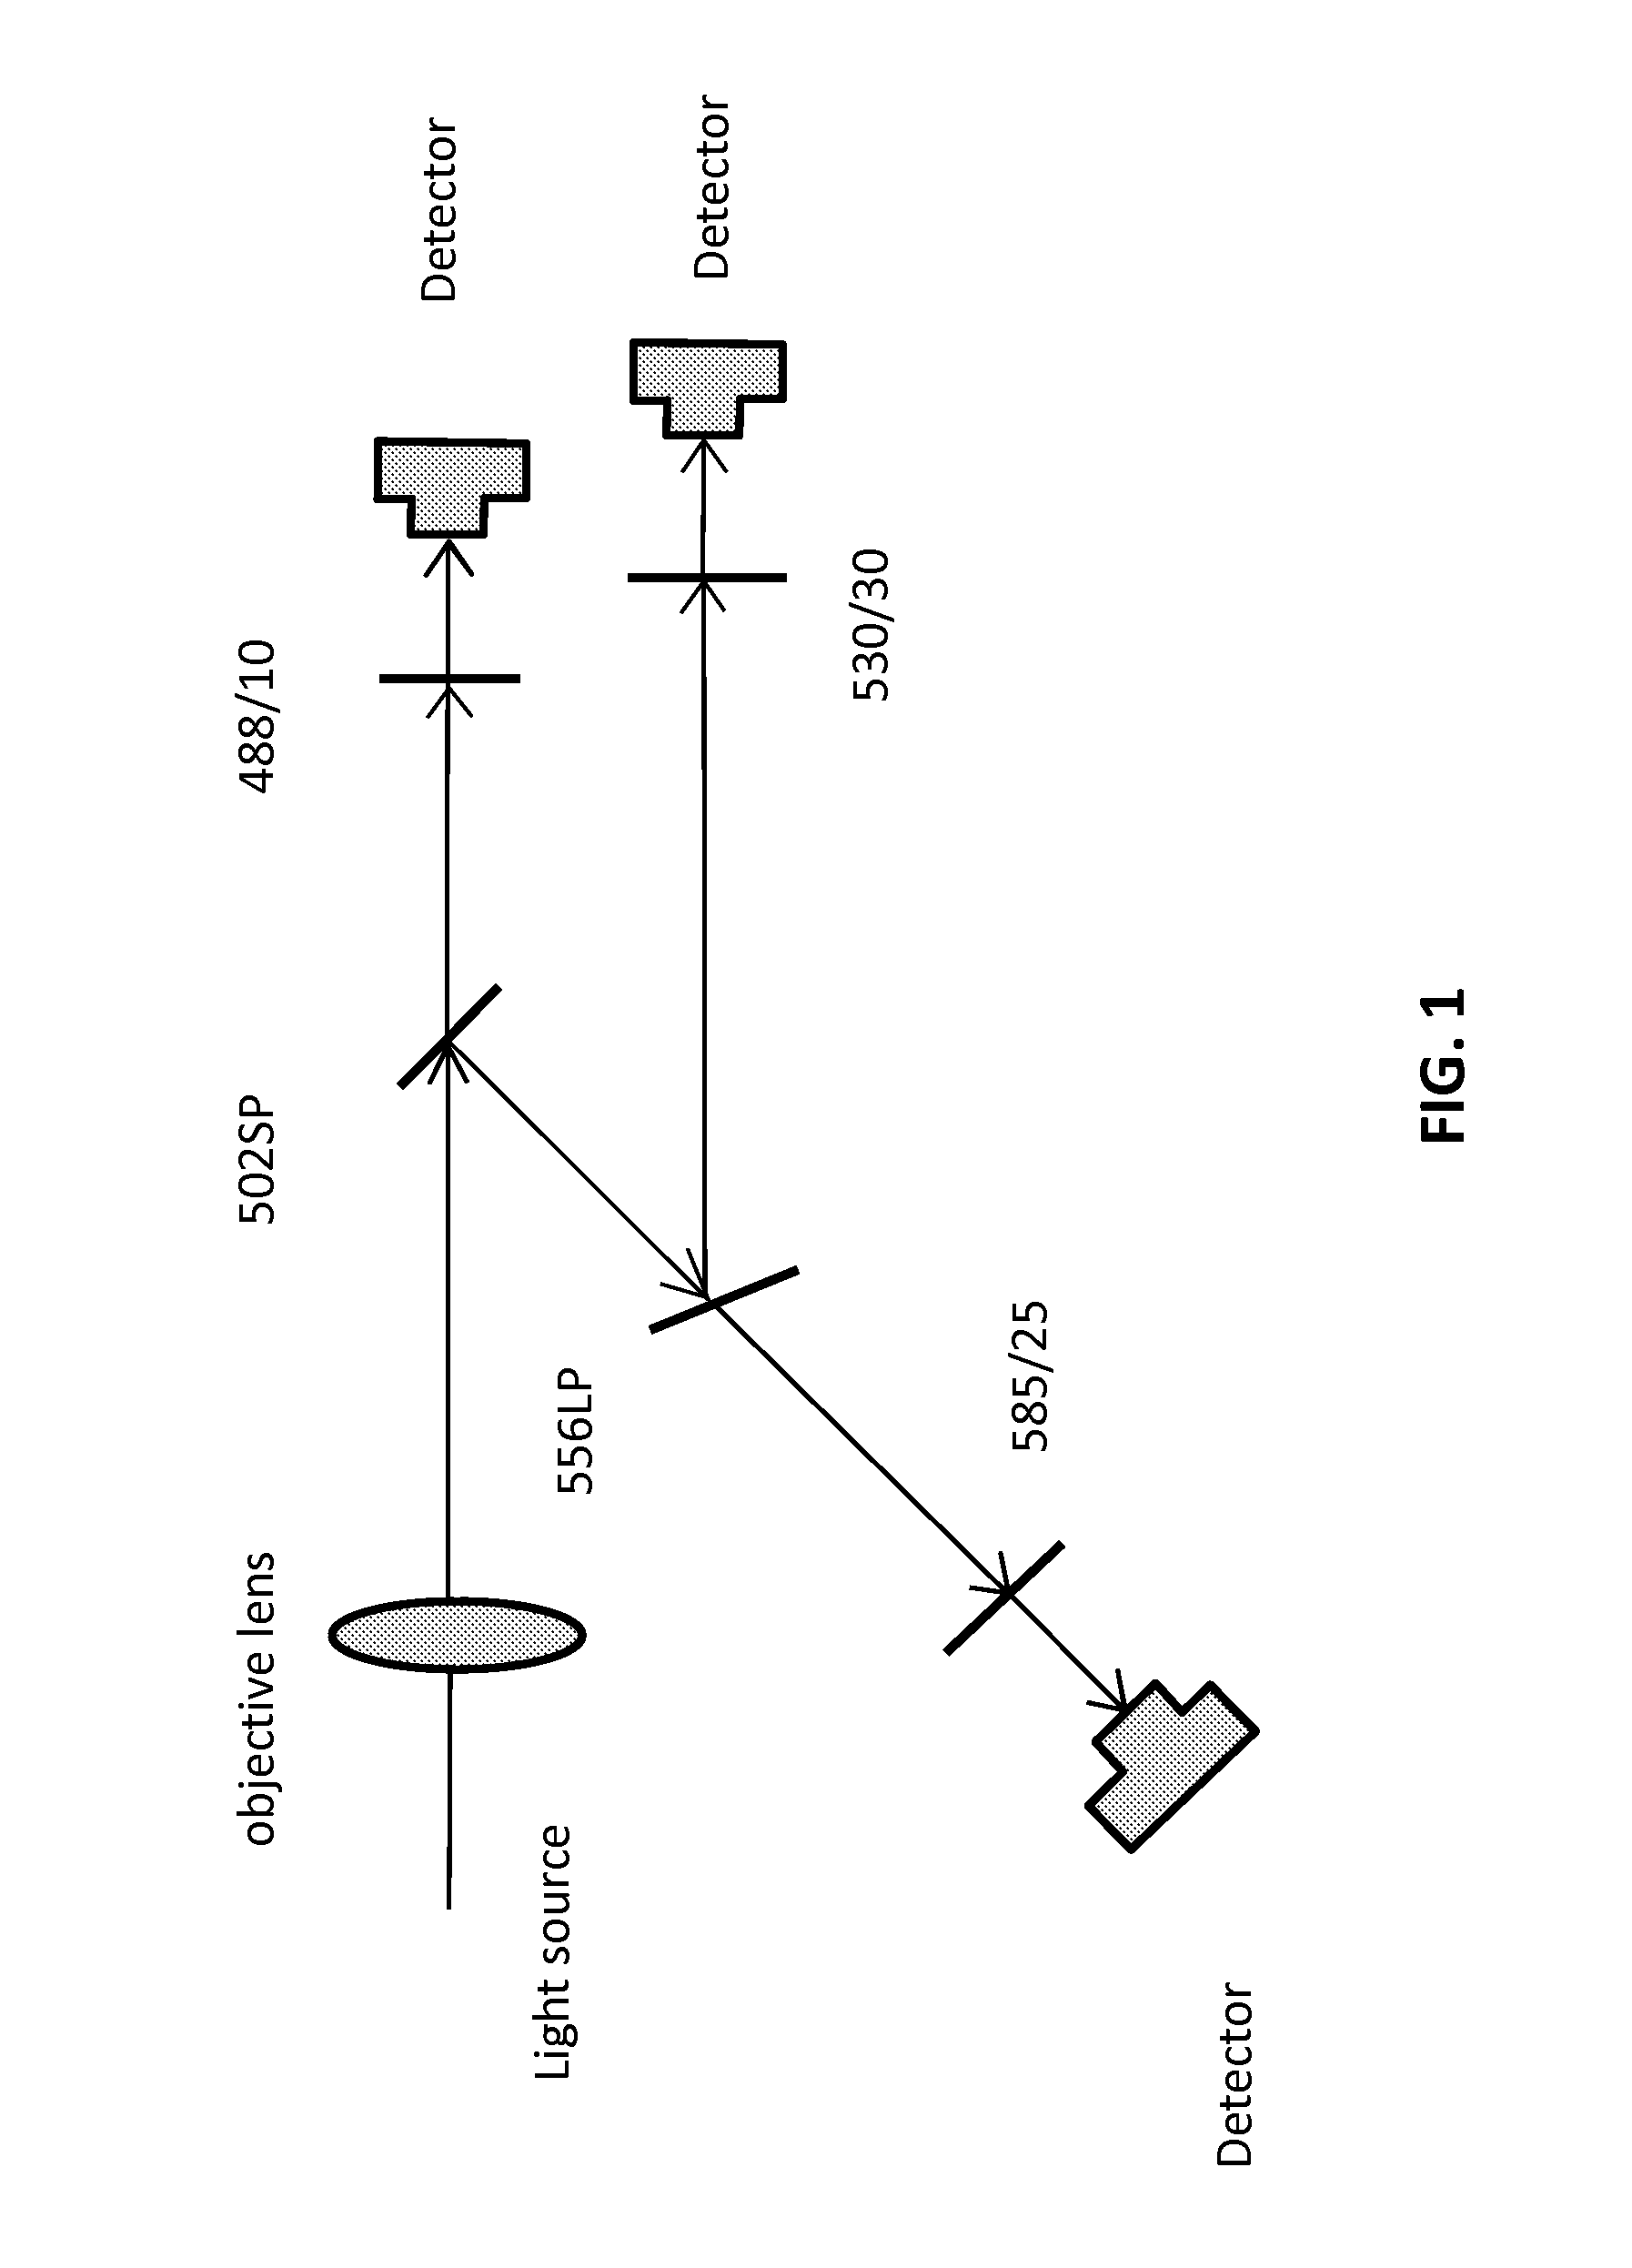 Device for splitting light into components having different wavelength ranges and methods of use